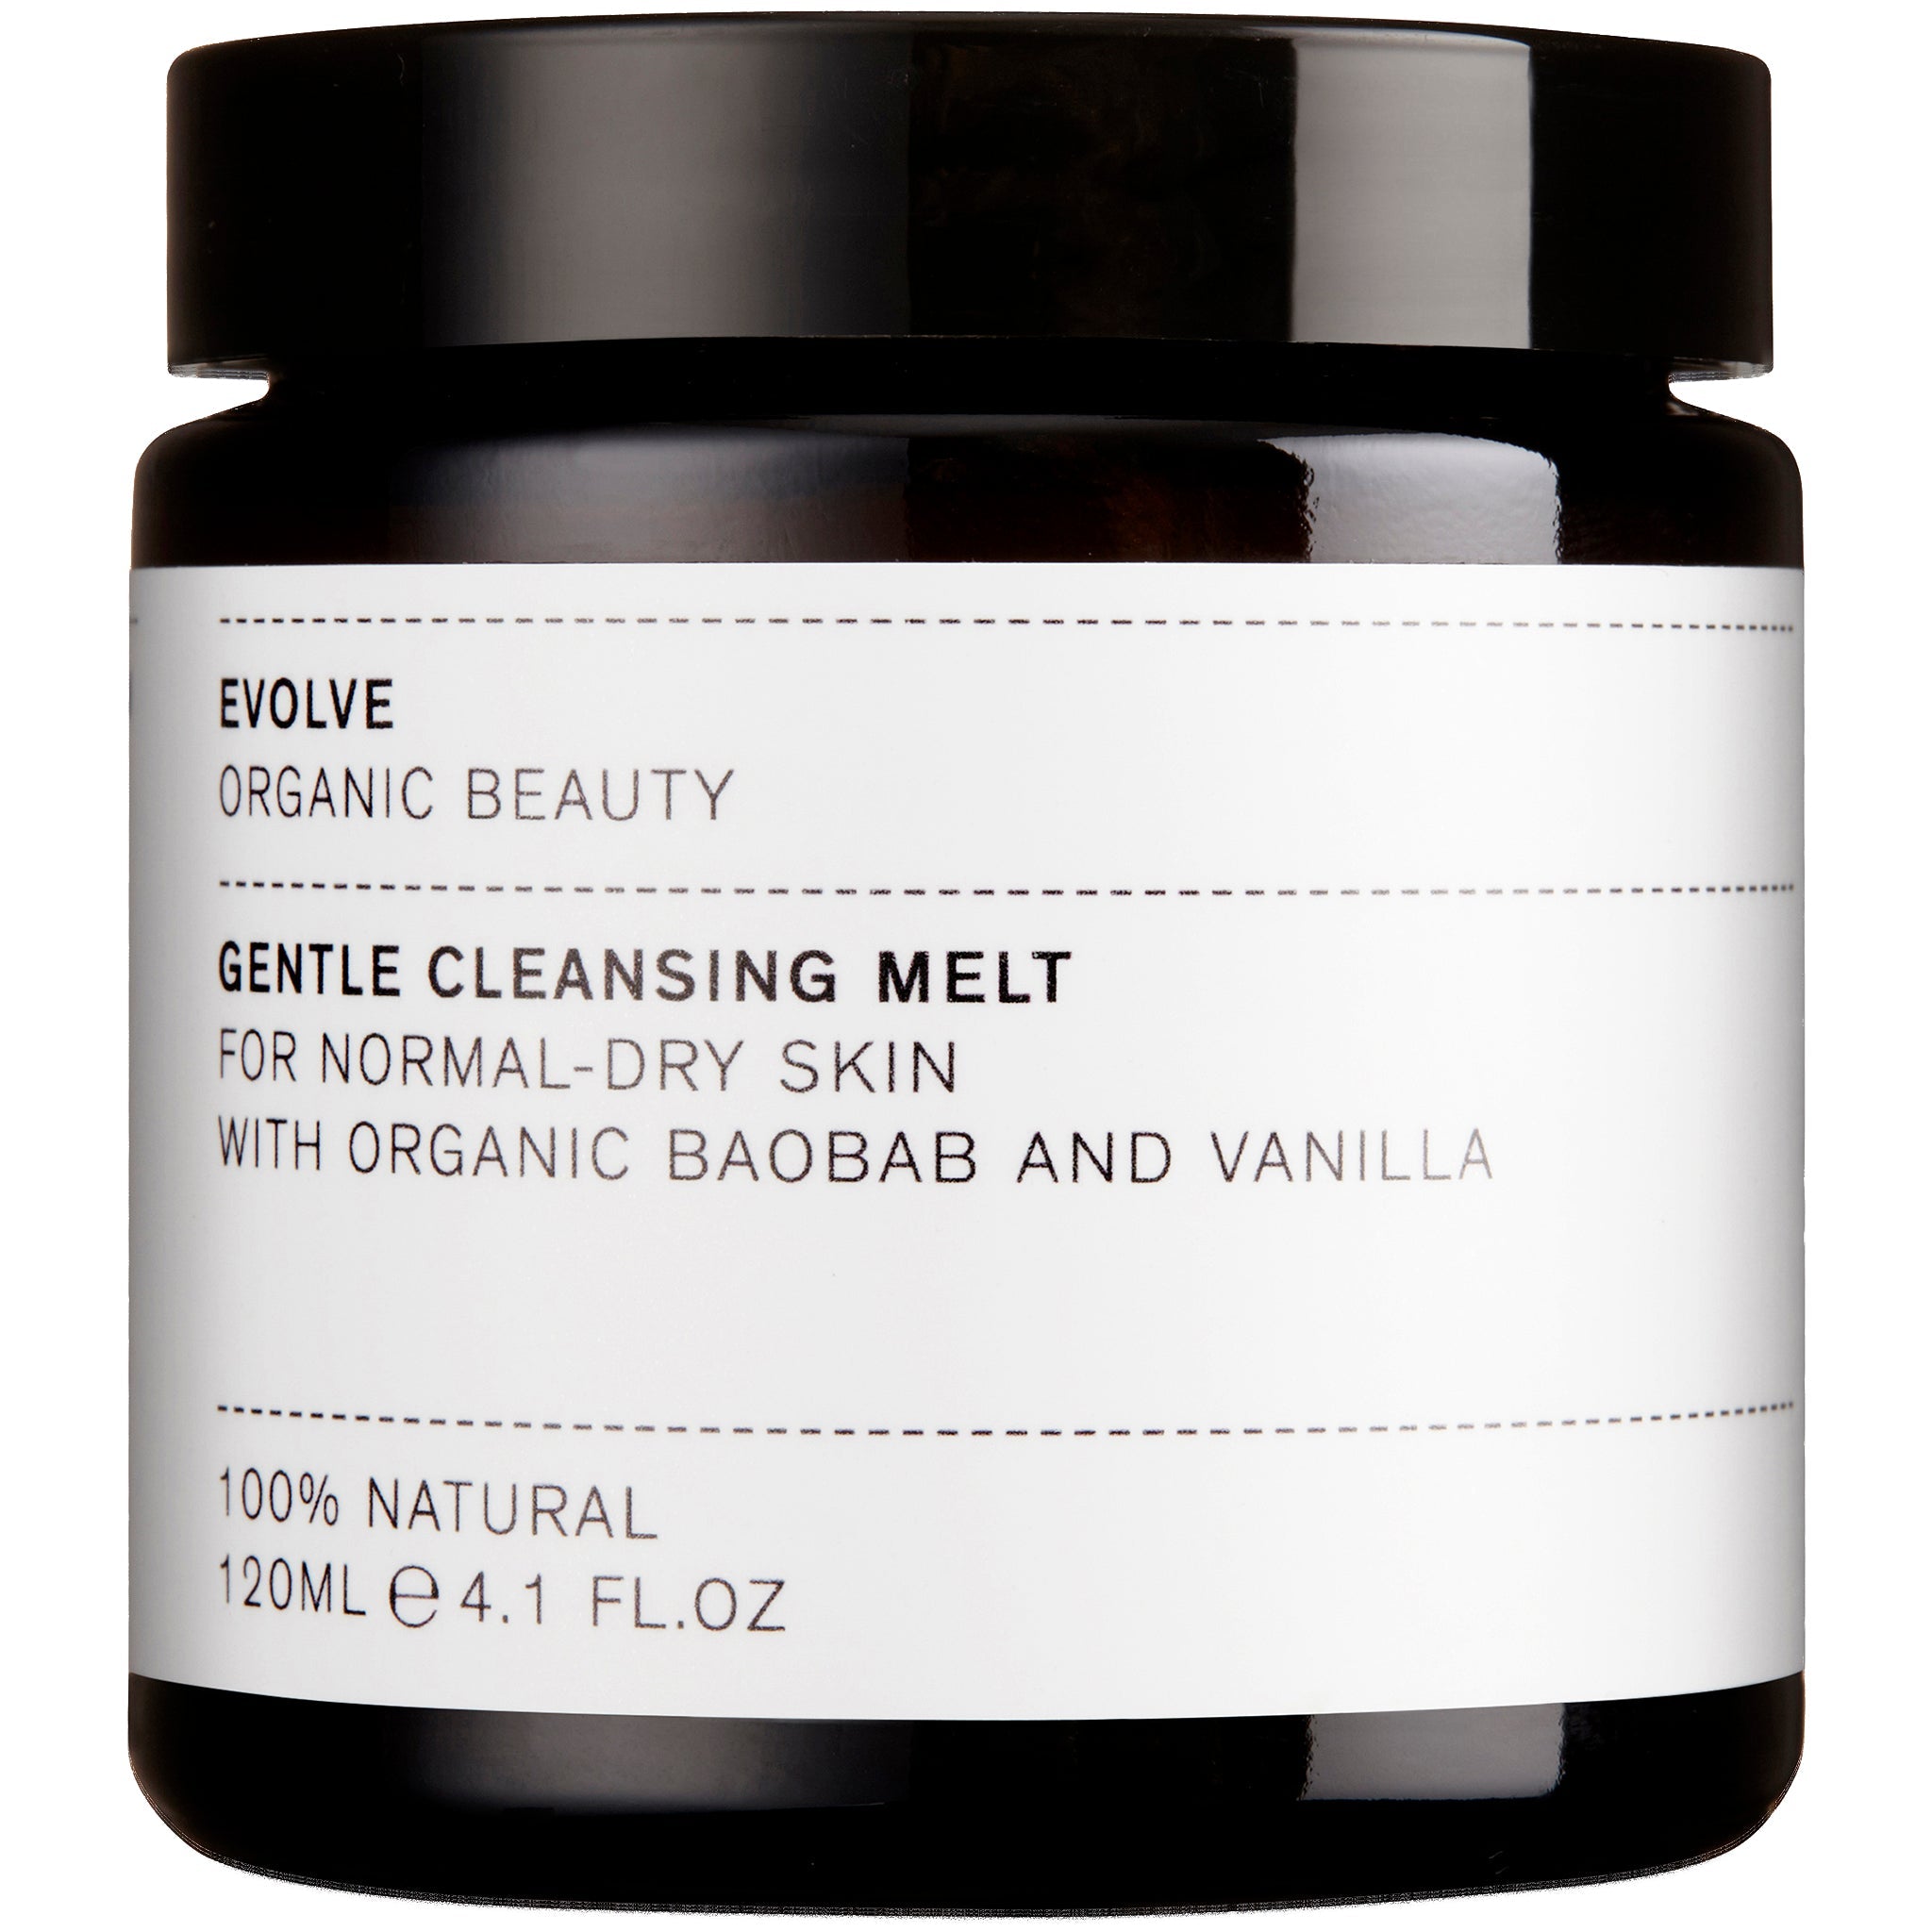 Gentle Cleansing Melt - mypure.co.uk